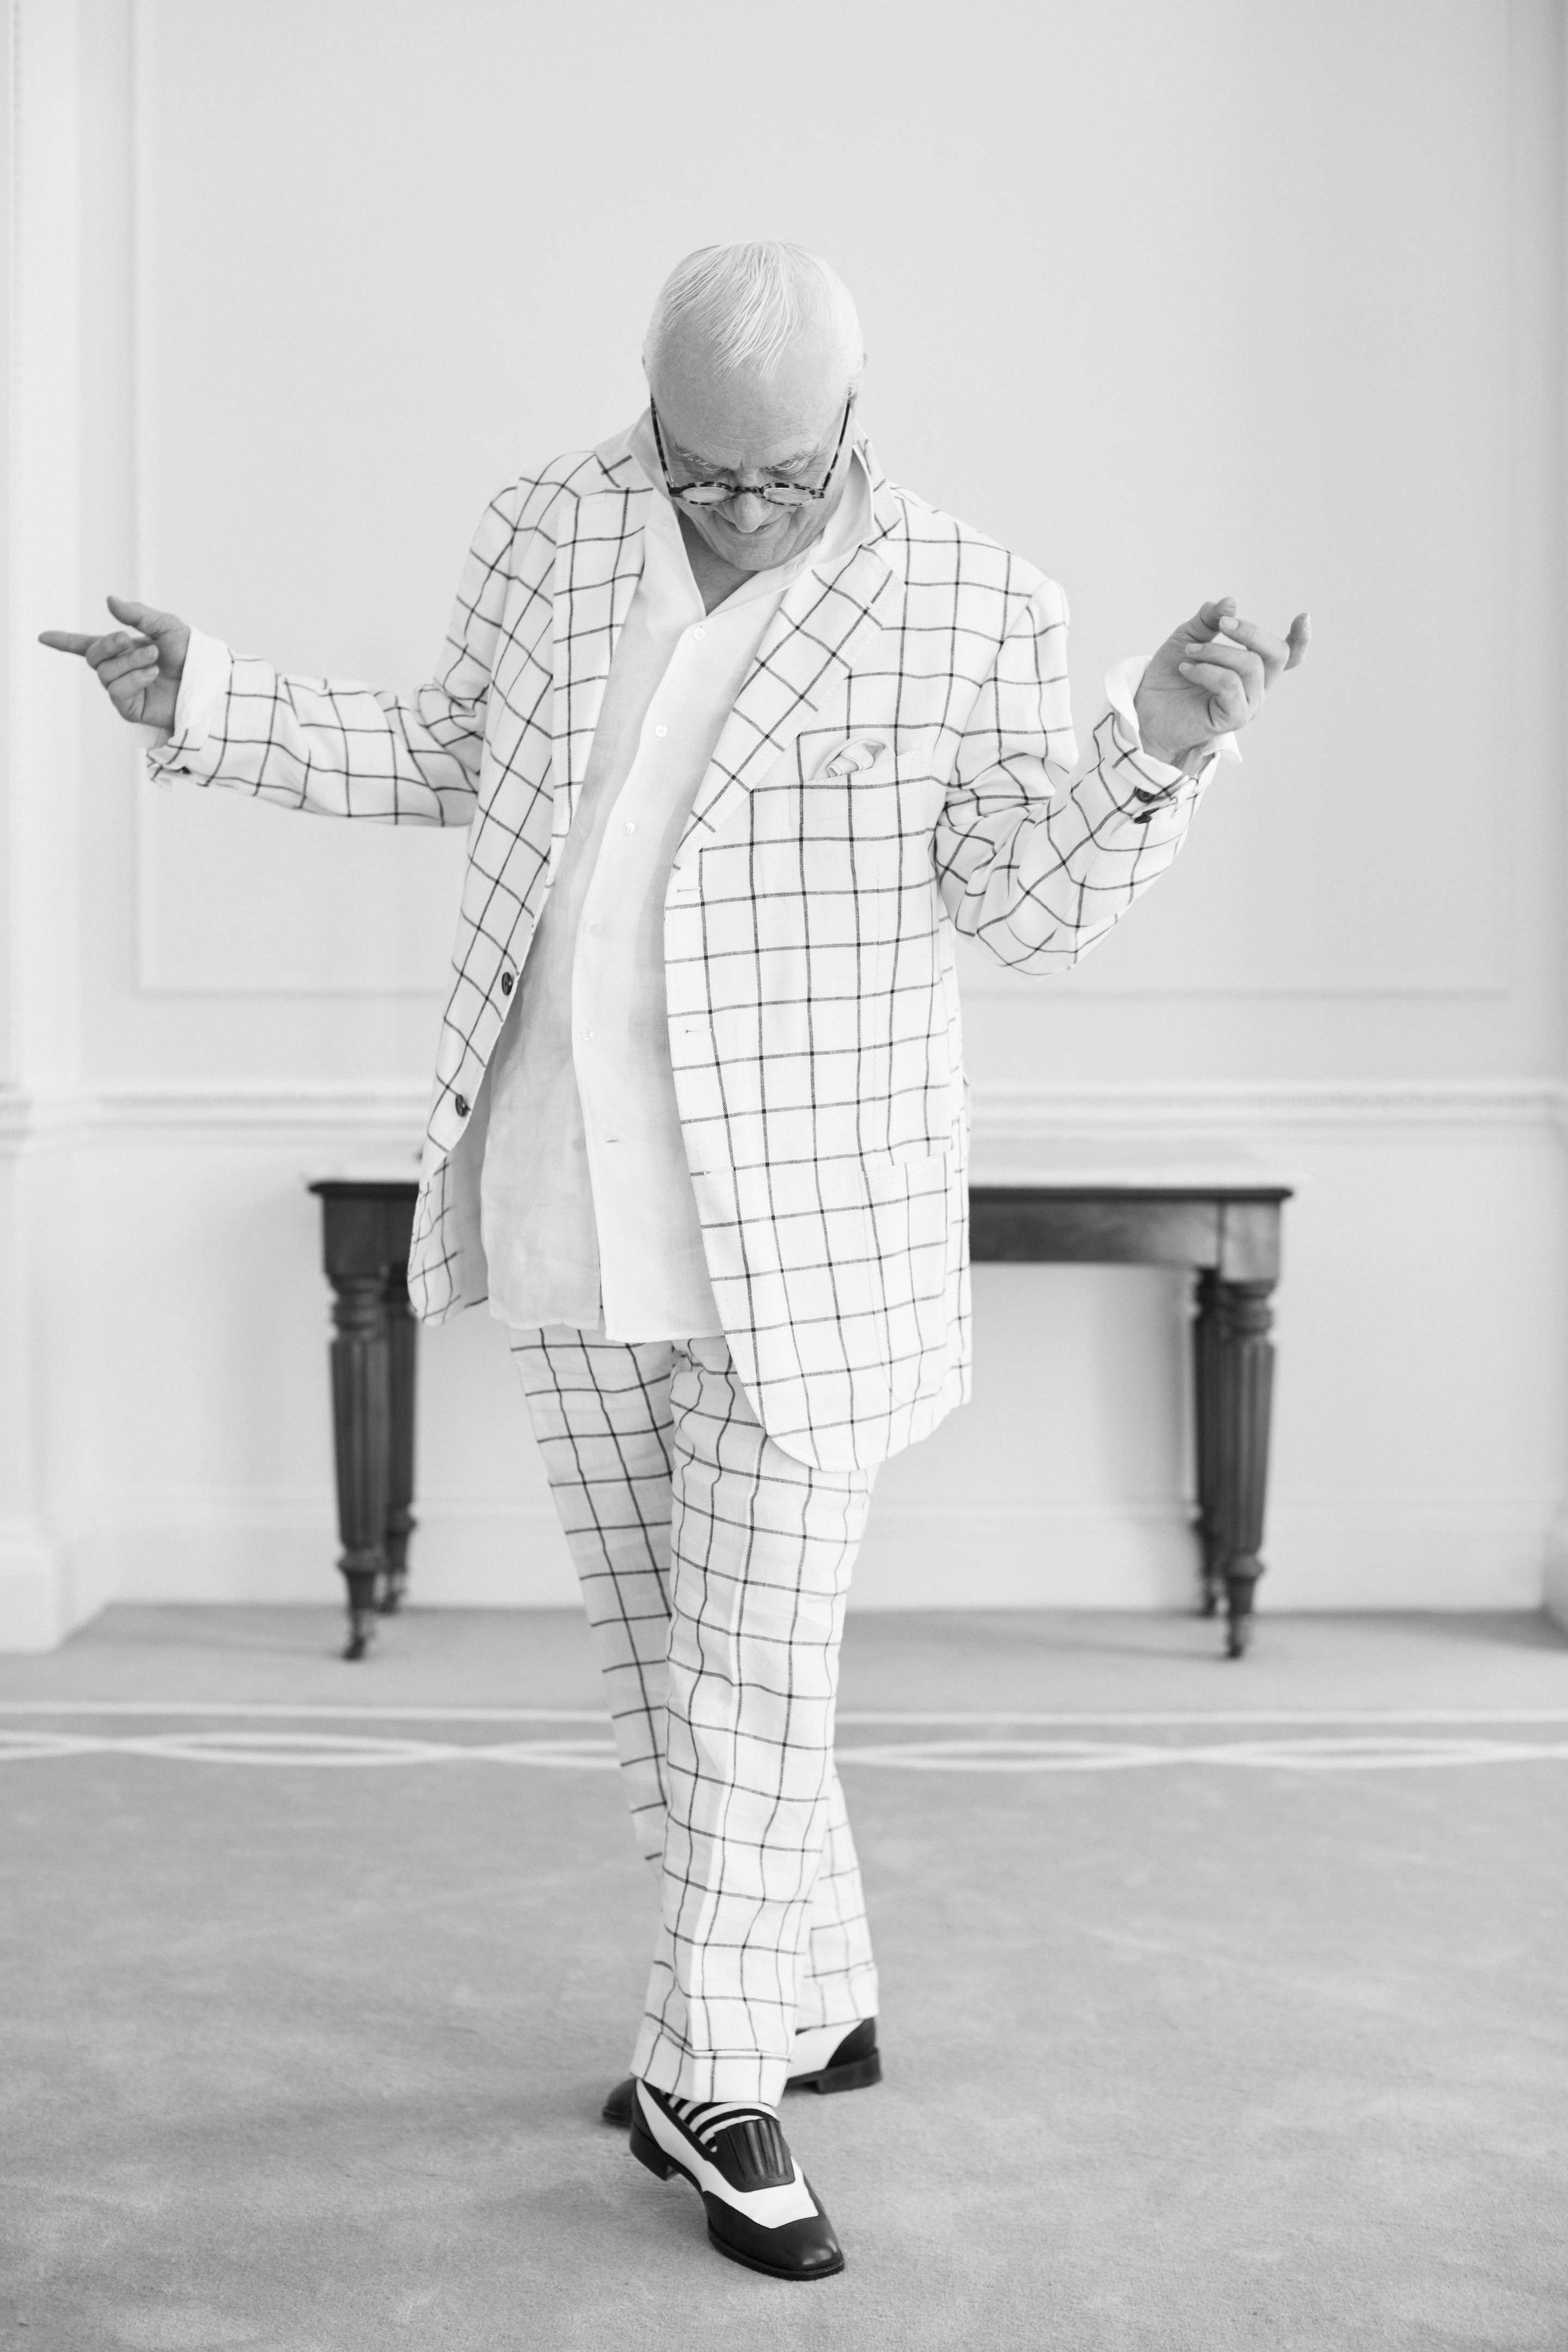 Manolo Blahnik wearing a white suit. He is looking at his feet. His hands are up in a whimsical and fun position.